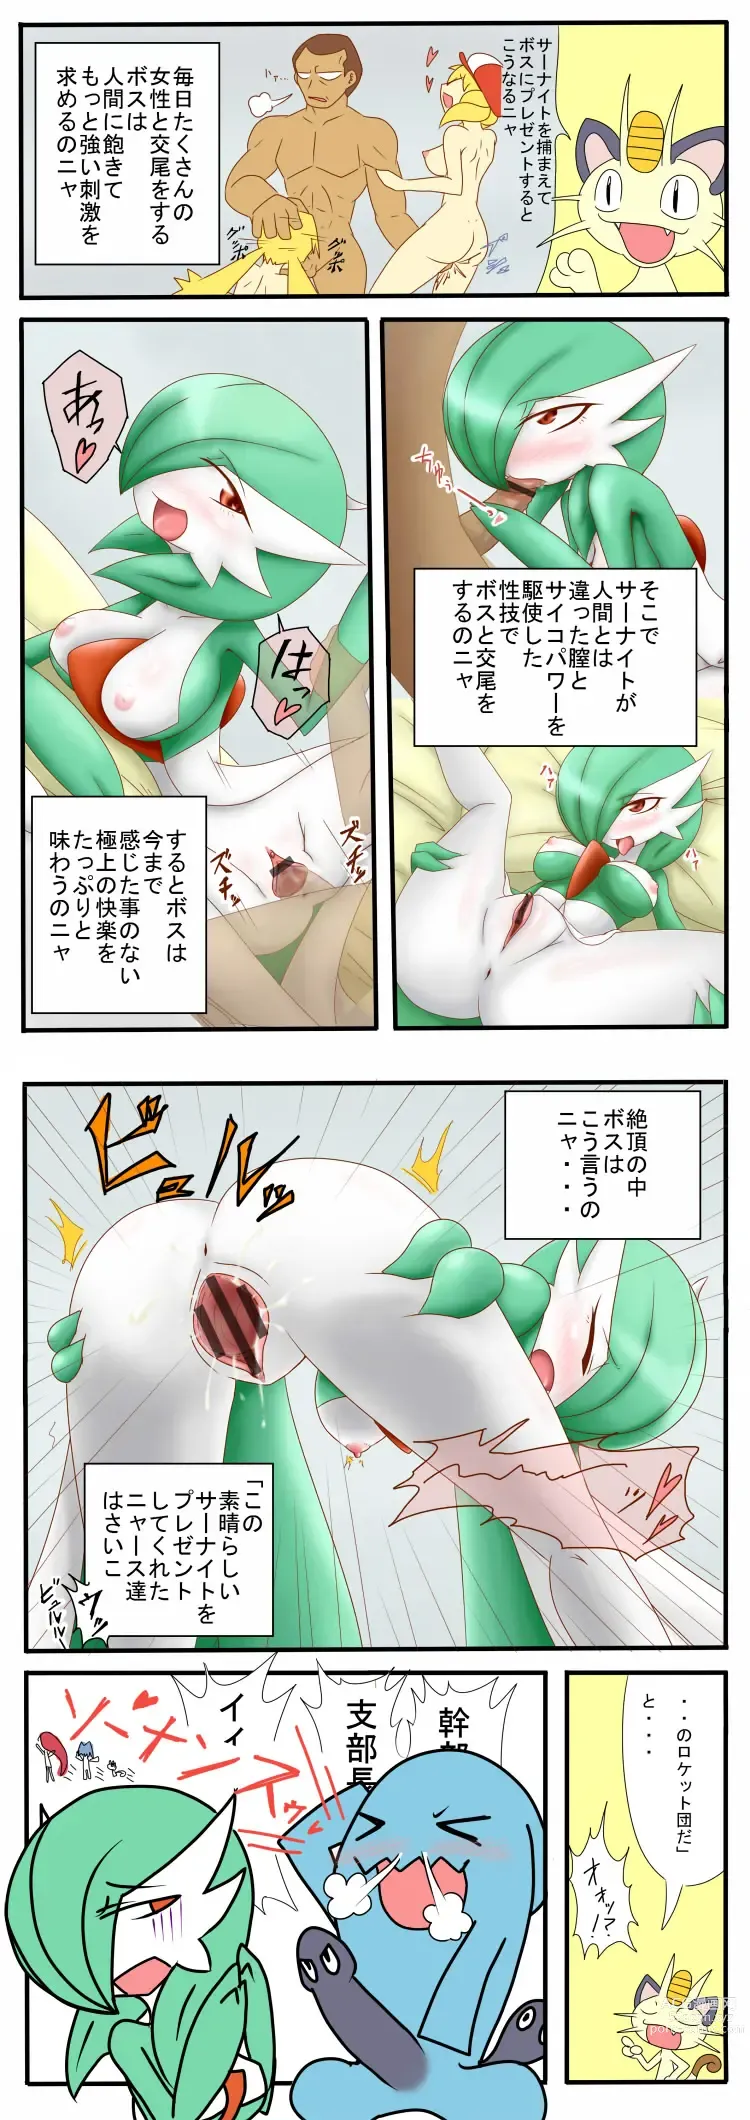 Page 1328 of imageset Furry - Gardevoir Collection